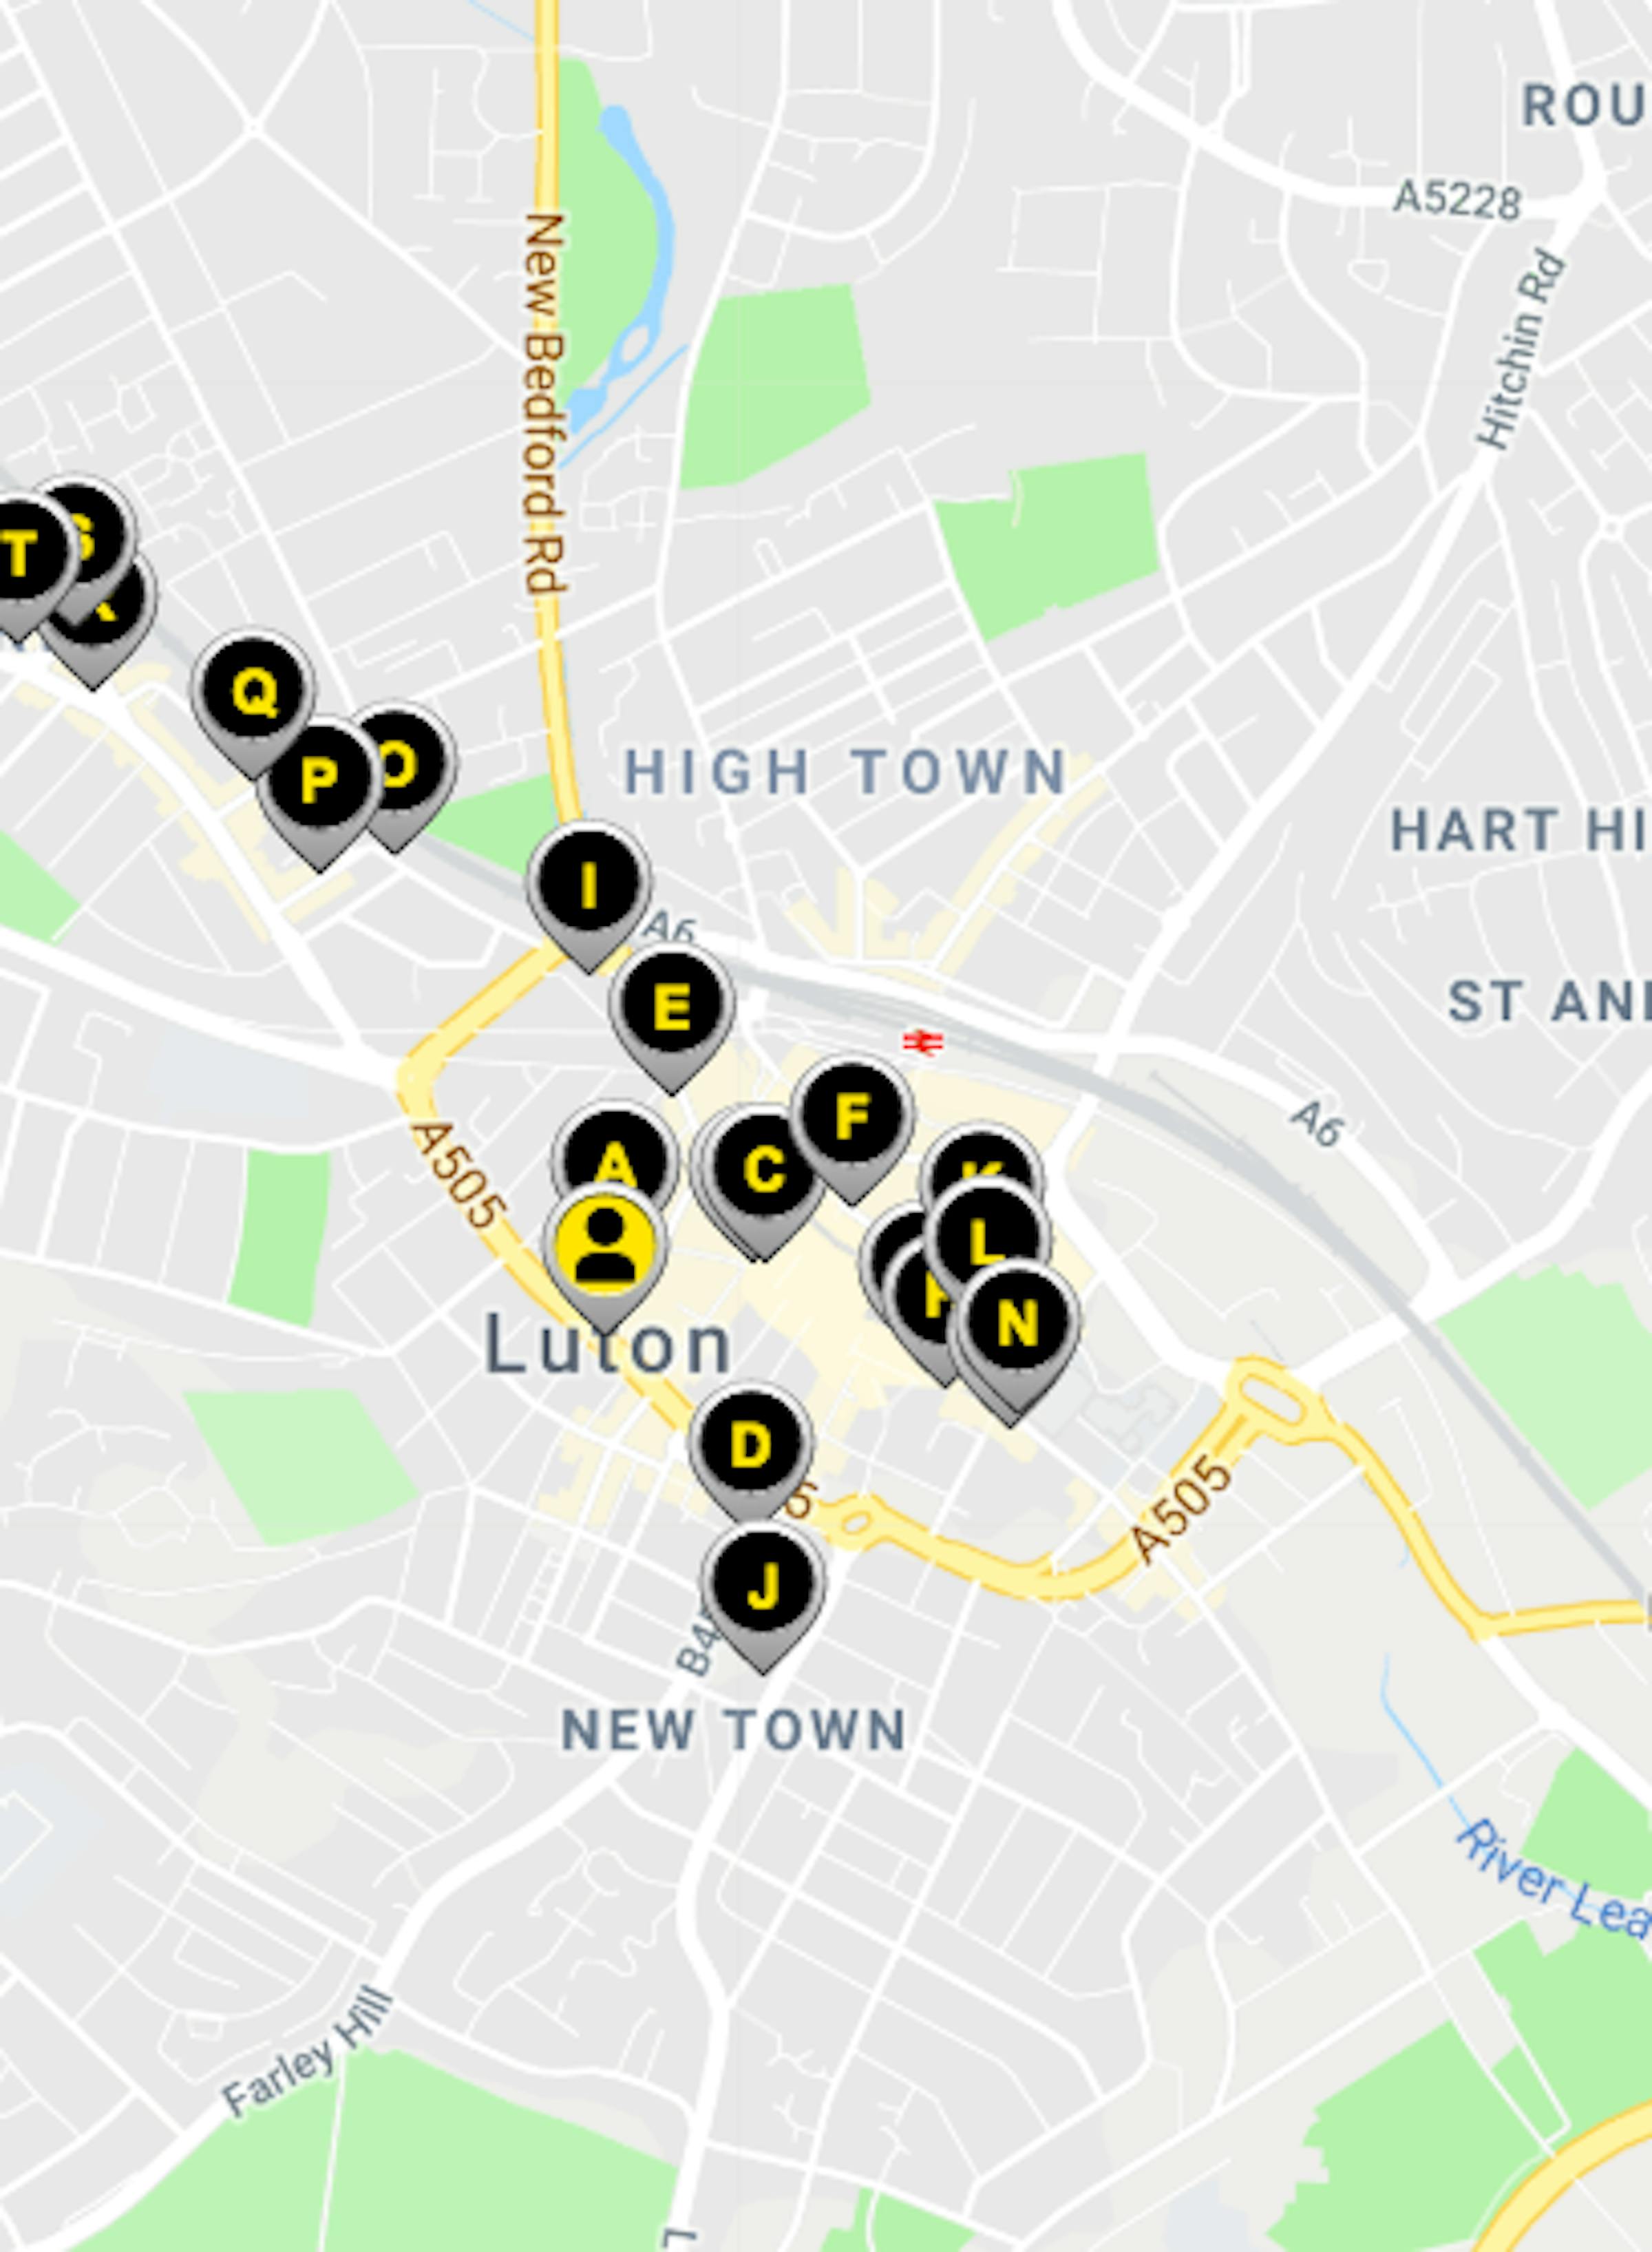 Western Union UK: How to find Western Union Agency Nearby?